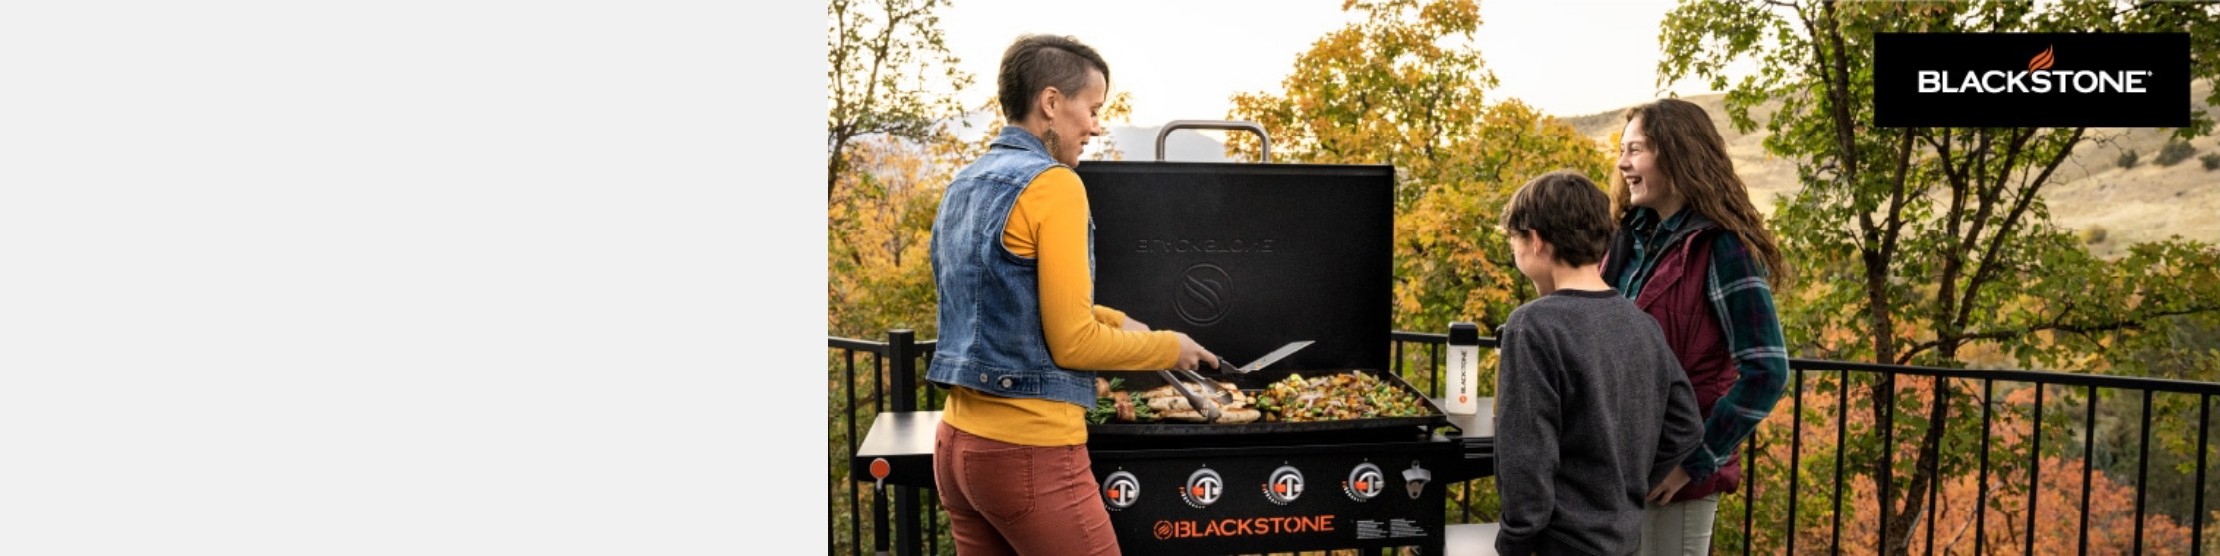 Blackstone Flat Top Grills   Cooking on a Blackstone is where all the fun begins!